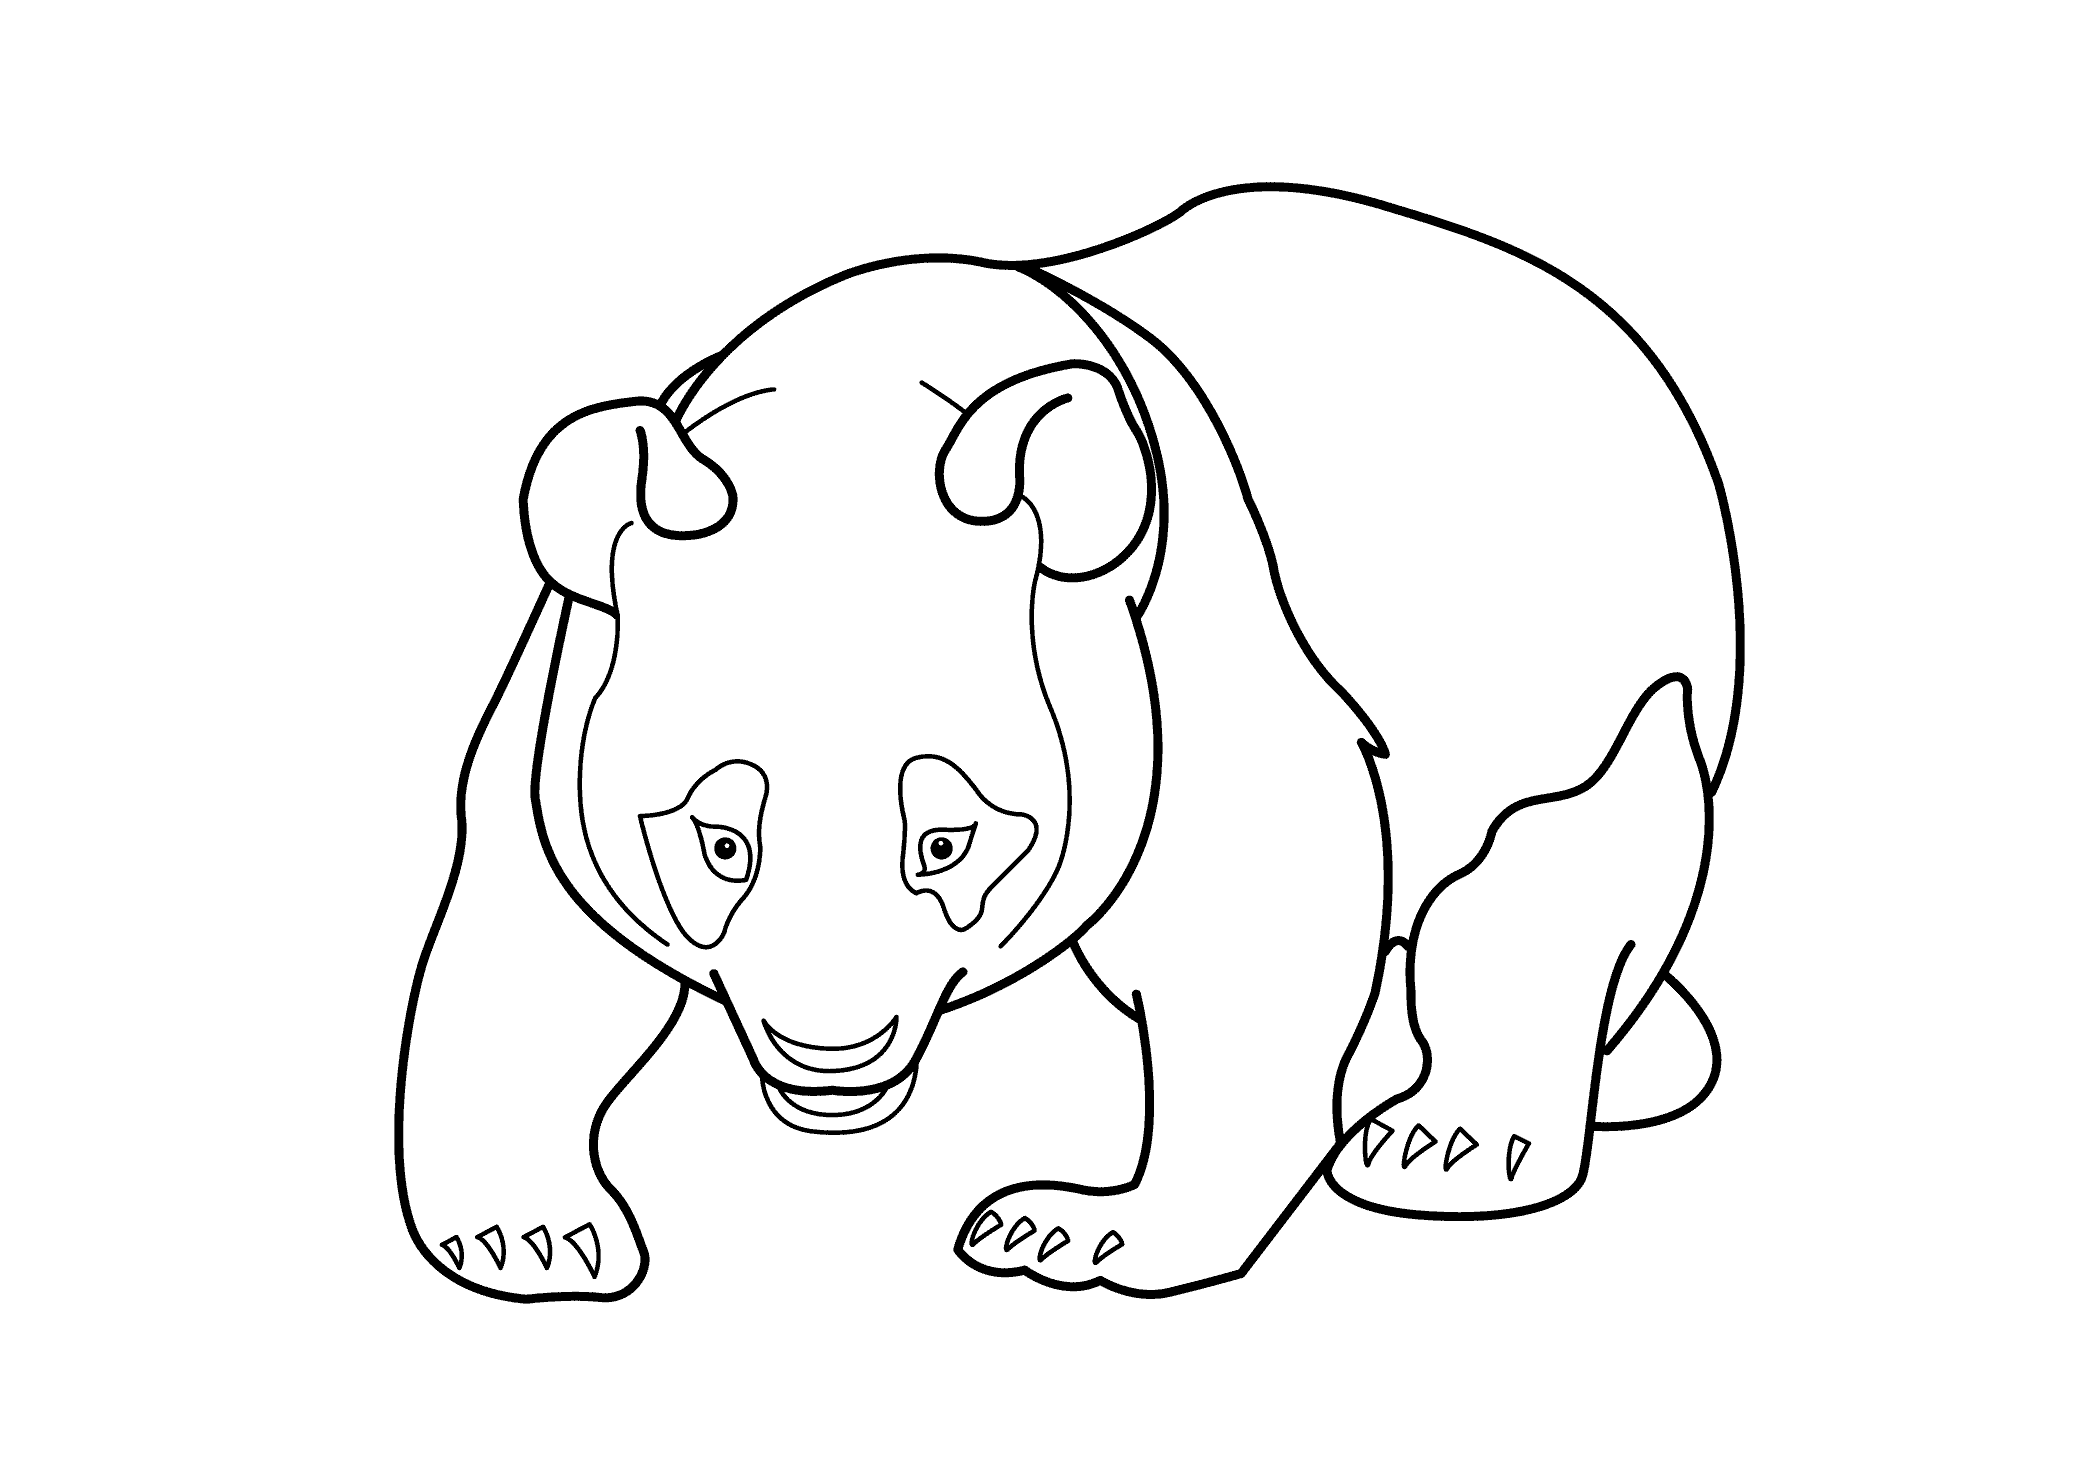 red panda coloring pages